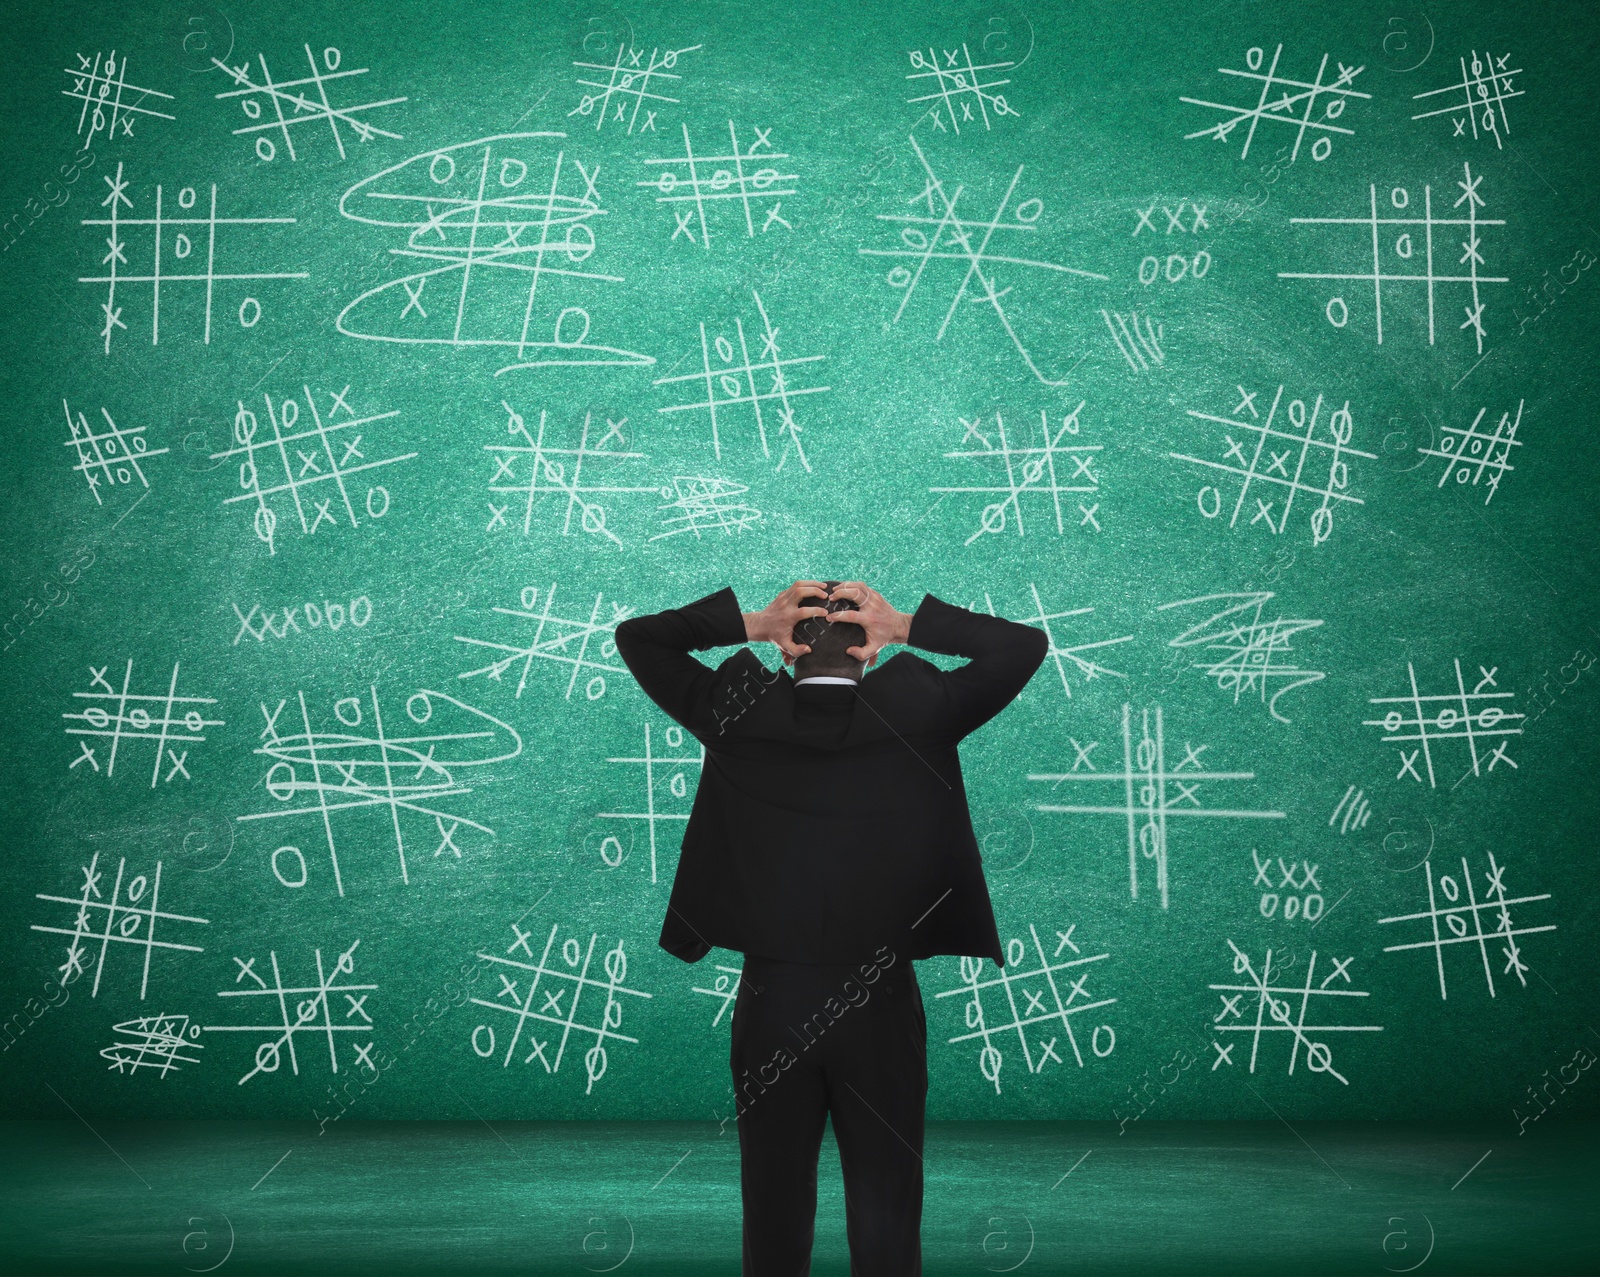 Image of Young businessman near green chalkboard with drawn tic tac toe game, back view